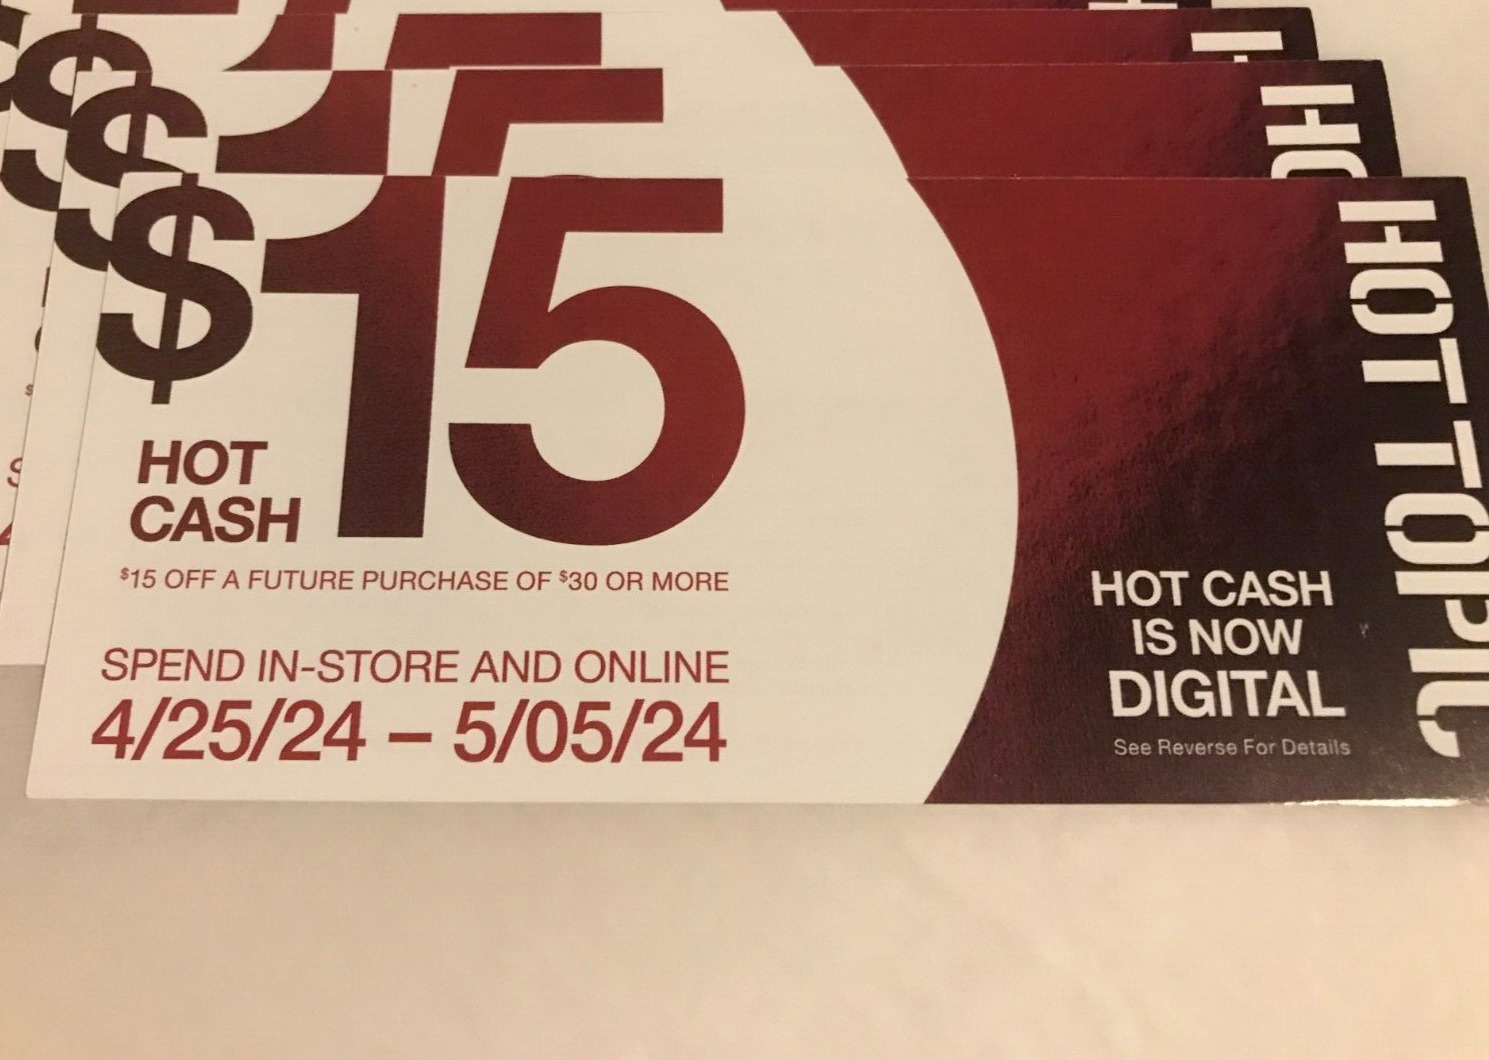 3 Hot Topic Hot Cash $15 off $30 coupon codes valid from 04/25/24 to 05/05/24